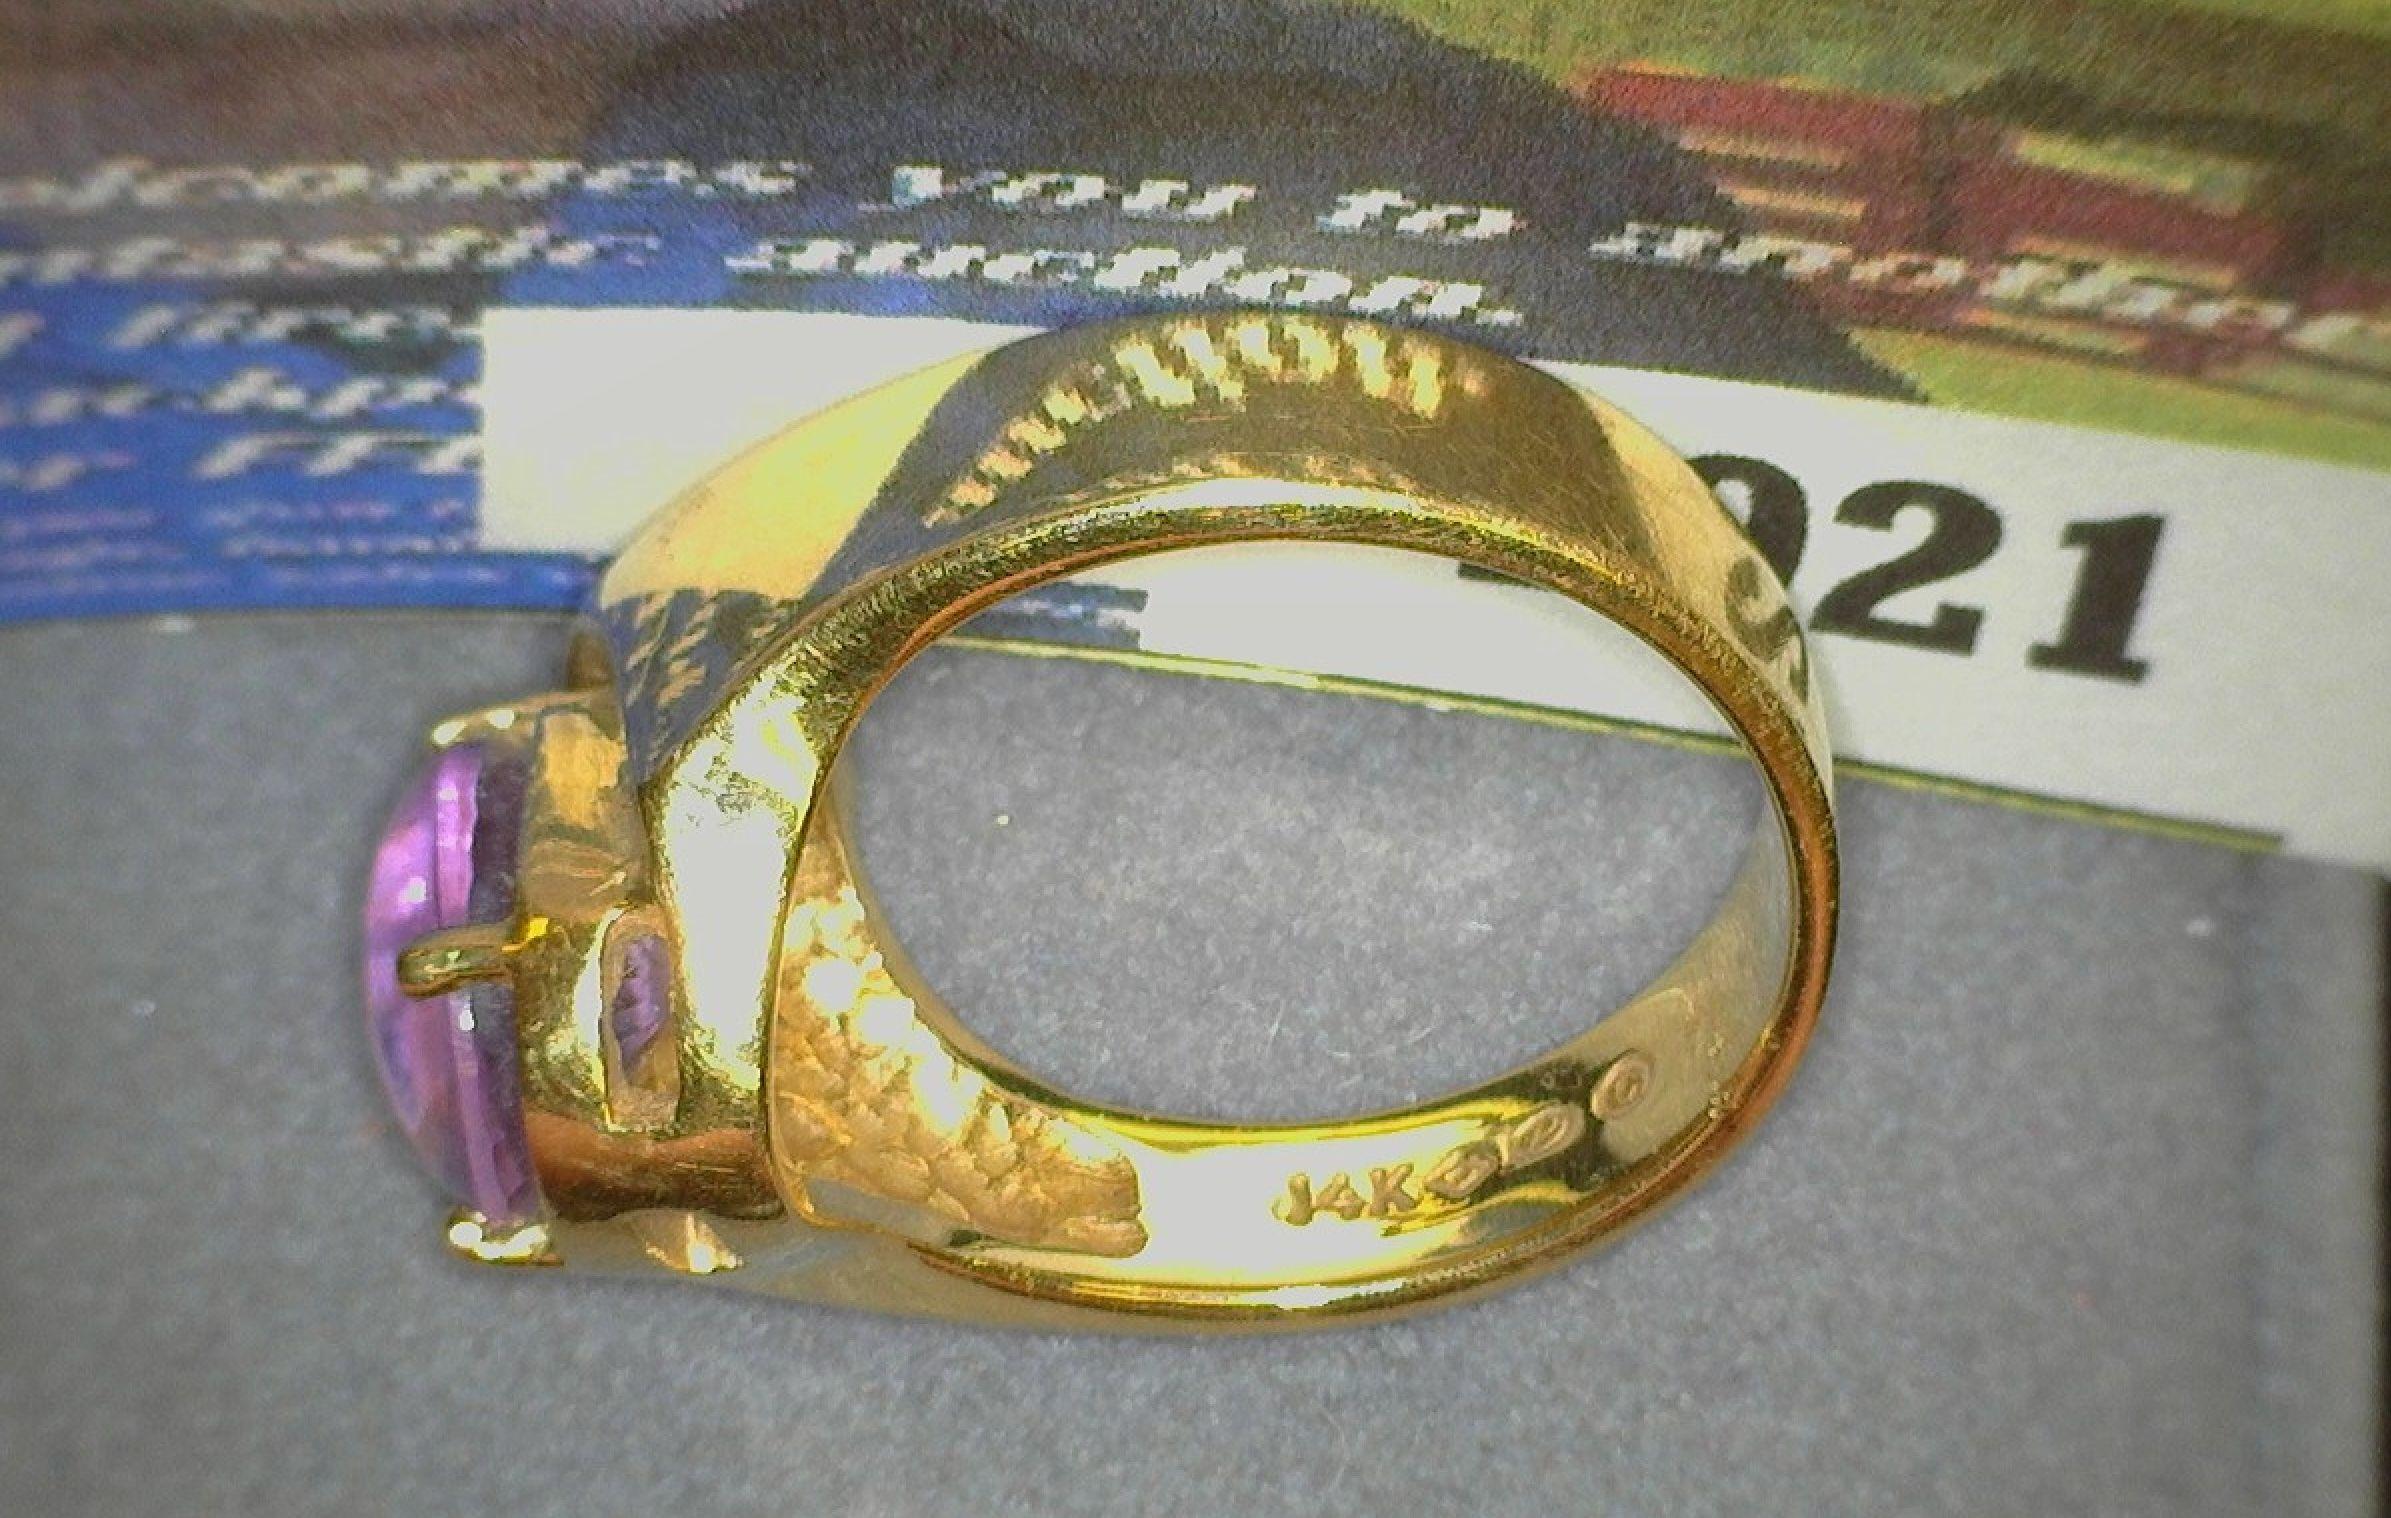 Ladies Size 7 Amethyst Ring, weighs 7 grams. 14K Yellow Gold. Purchased by Dave for Pam at Rhynas Je